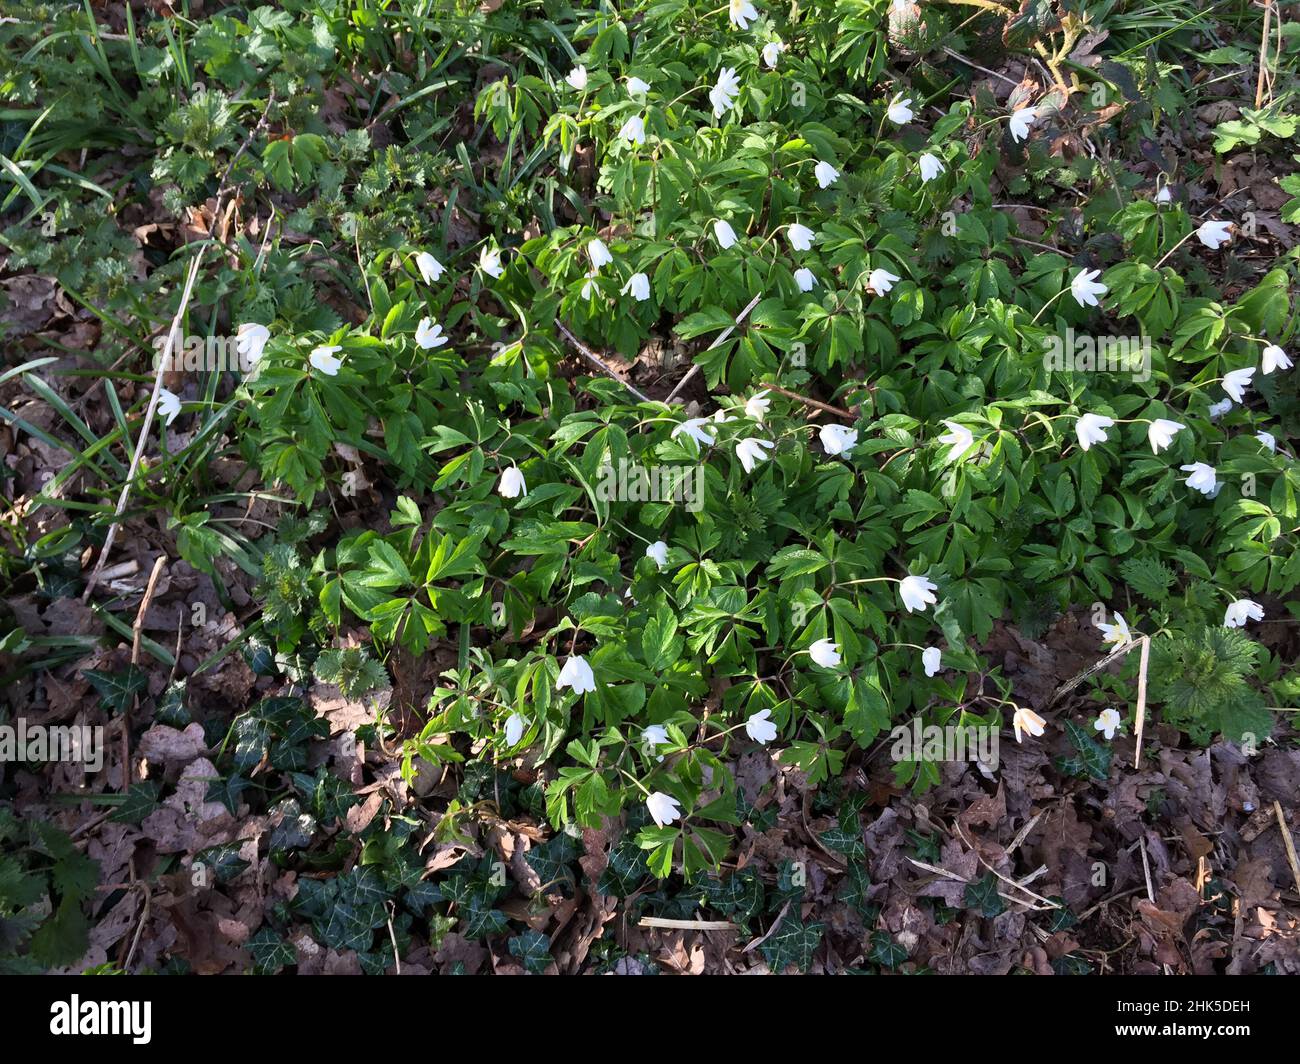 Wood anemones growing in dappled shade on the woodland floor in spring with young, stinging nettles and young ivy leaves. Stock Photo